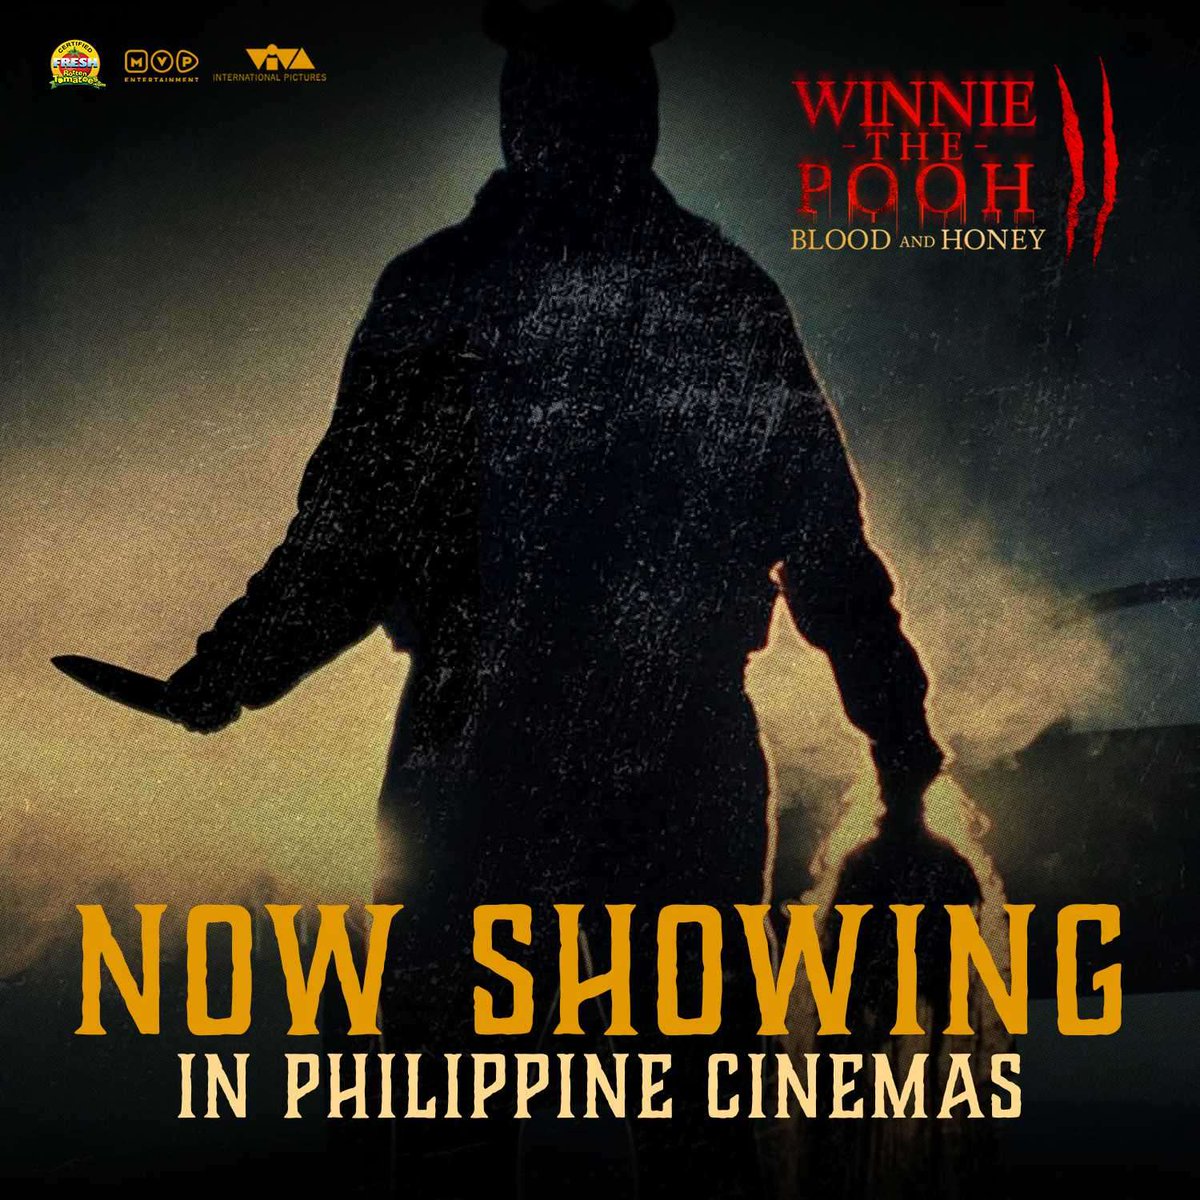 Hide before you get caught by his MONSTROUS attack! Catch 'WINNIE THE POOH: BLOOD and HONEY 2', NOW SHOWING In Philippine Cinemas! #WinnieThePooh2 #Blood&Honey2